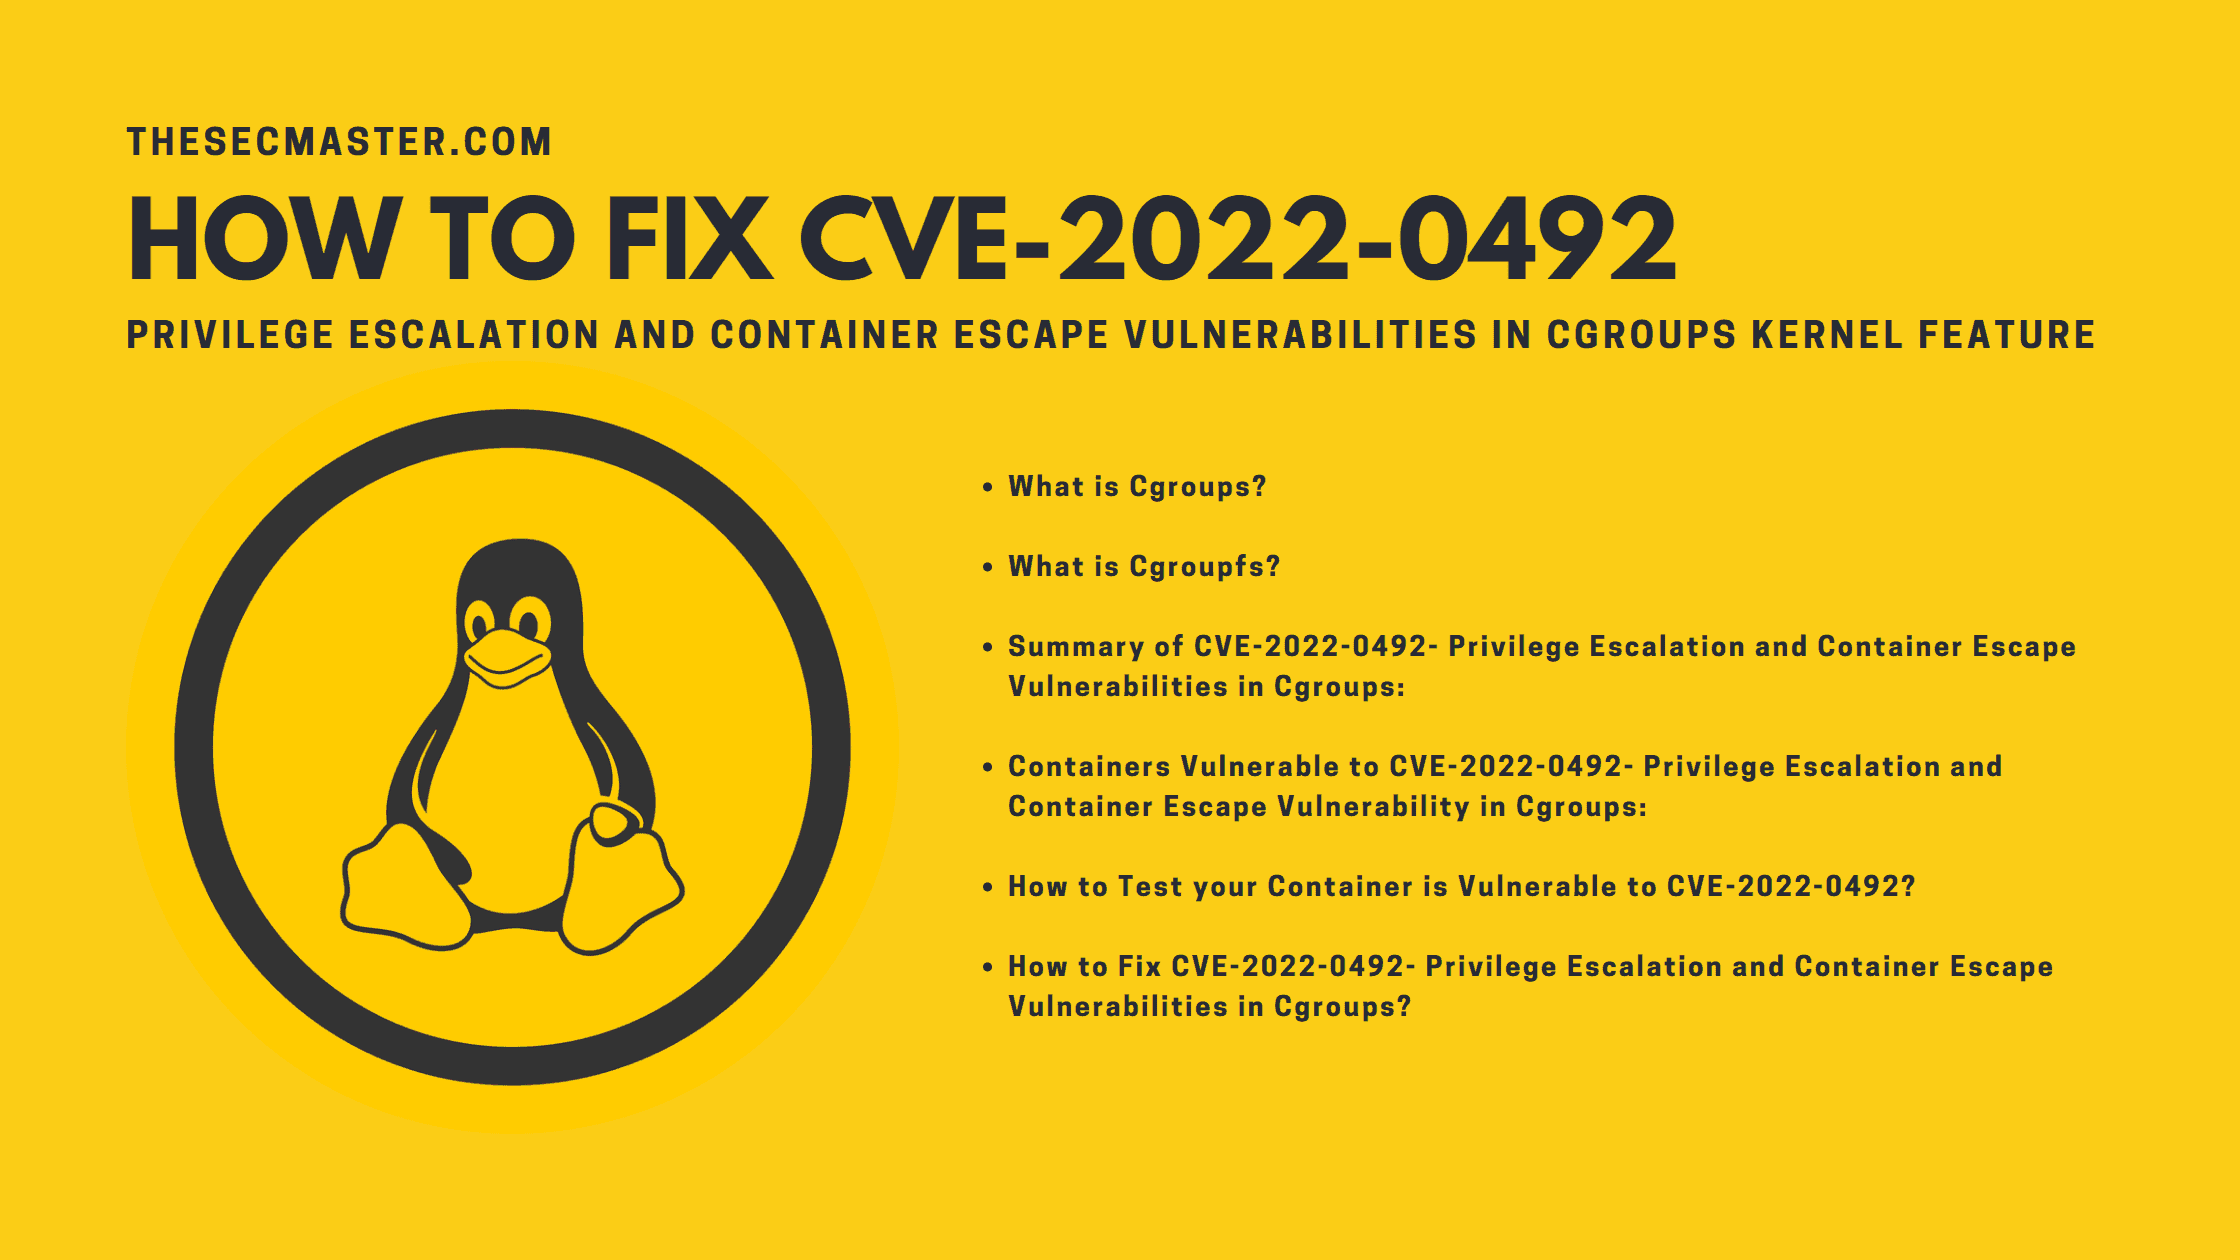 How To Fix Cve 2022 0492 Privilege Escalation And Container Escape Vulnerabilities In Cgroups